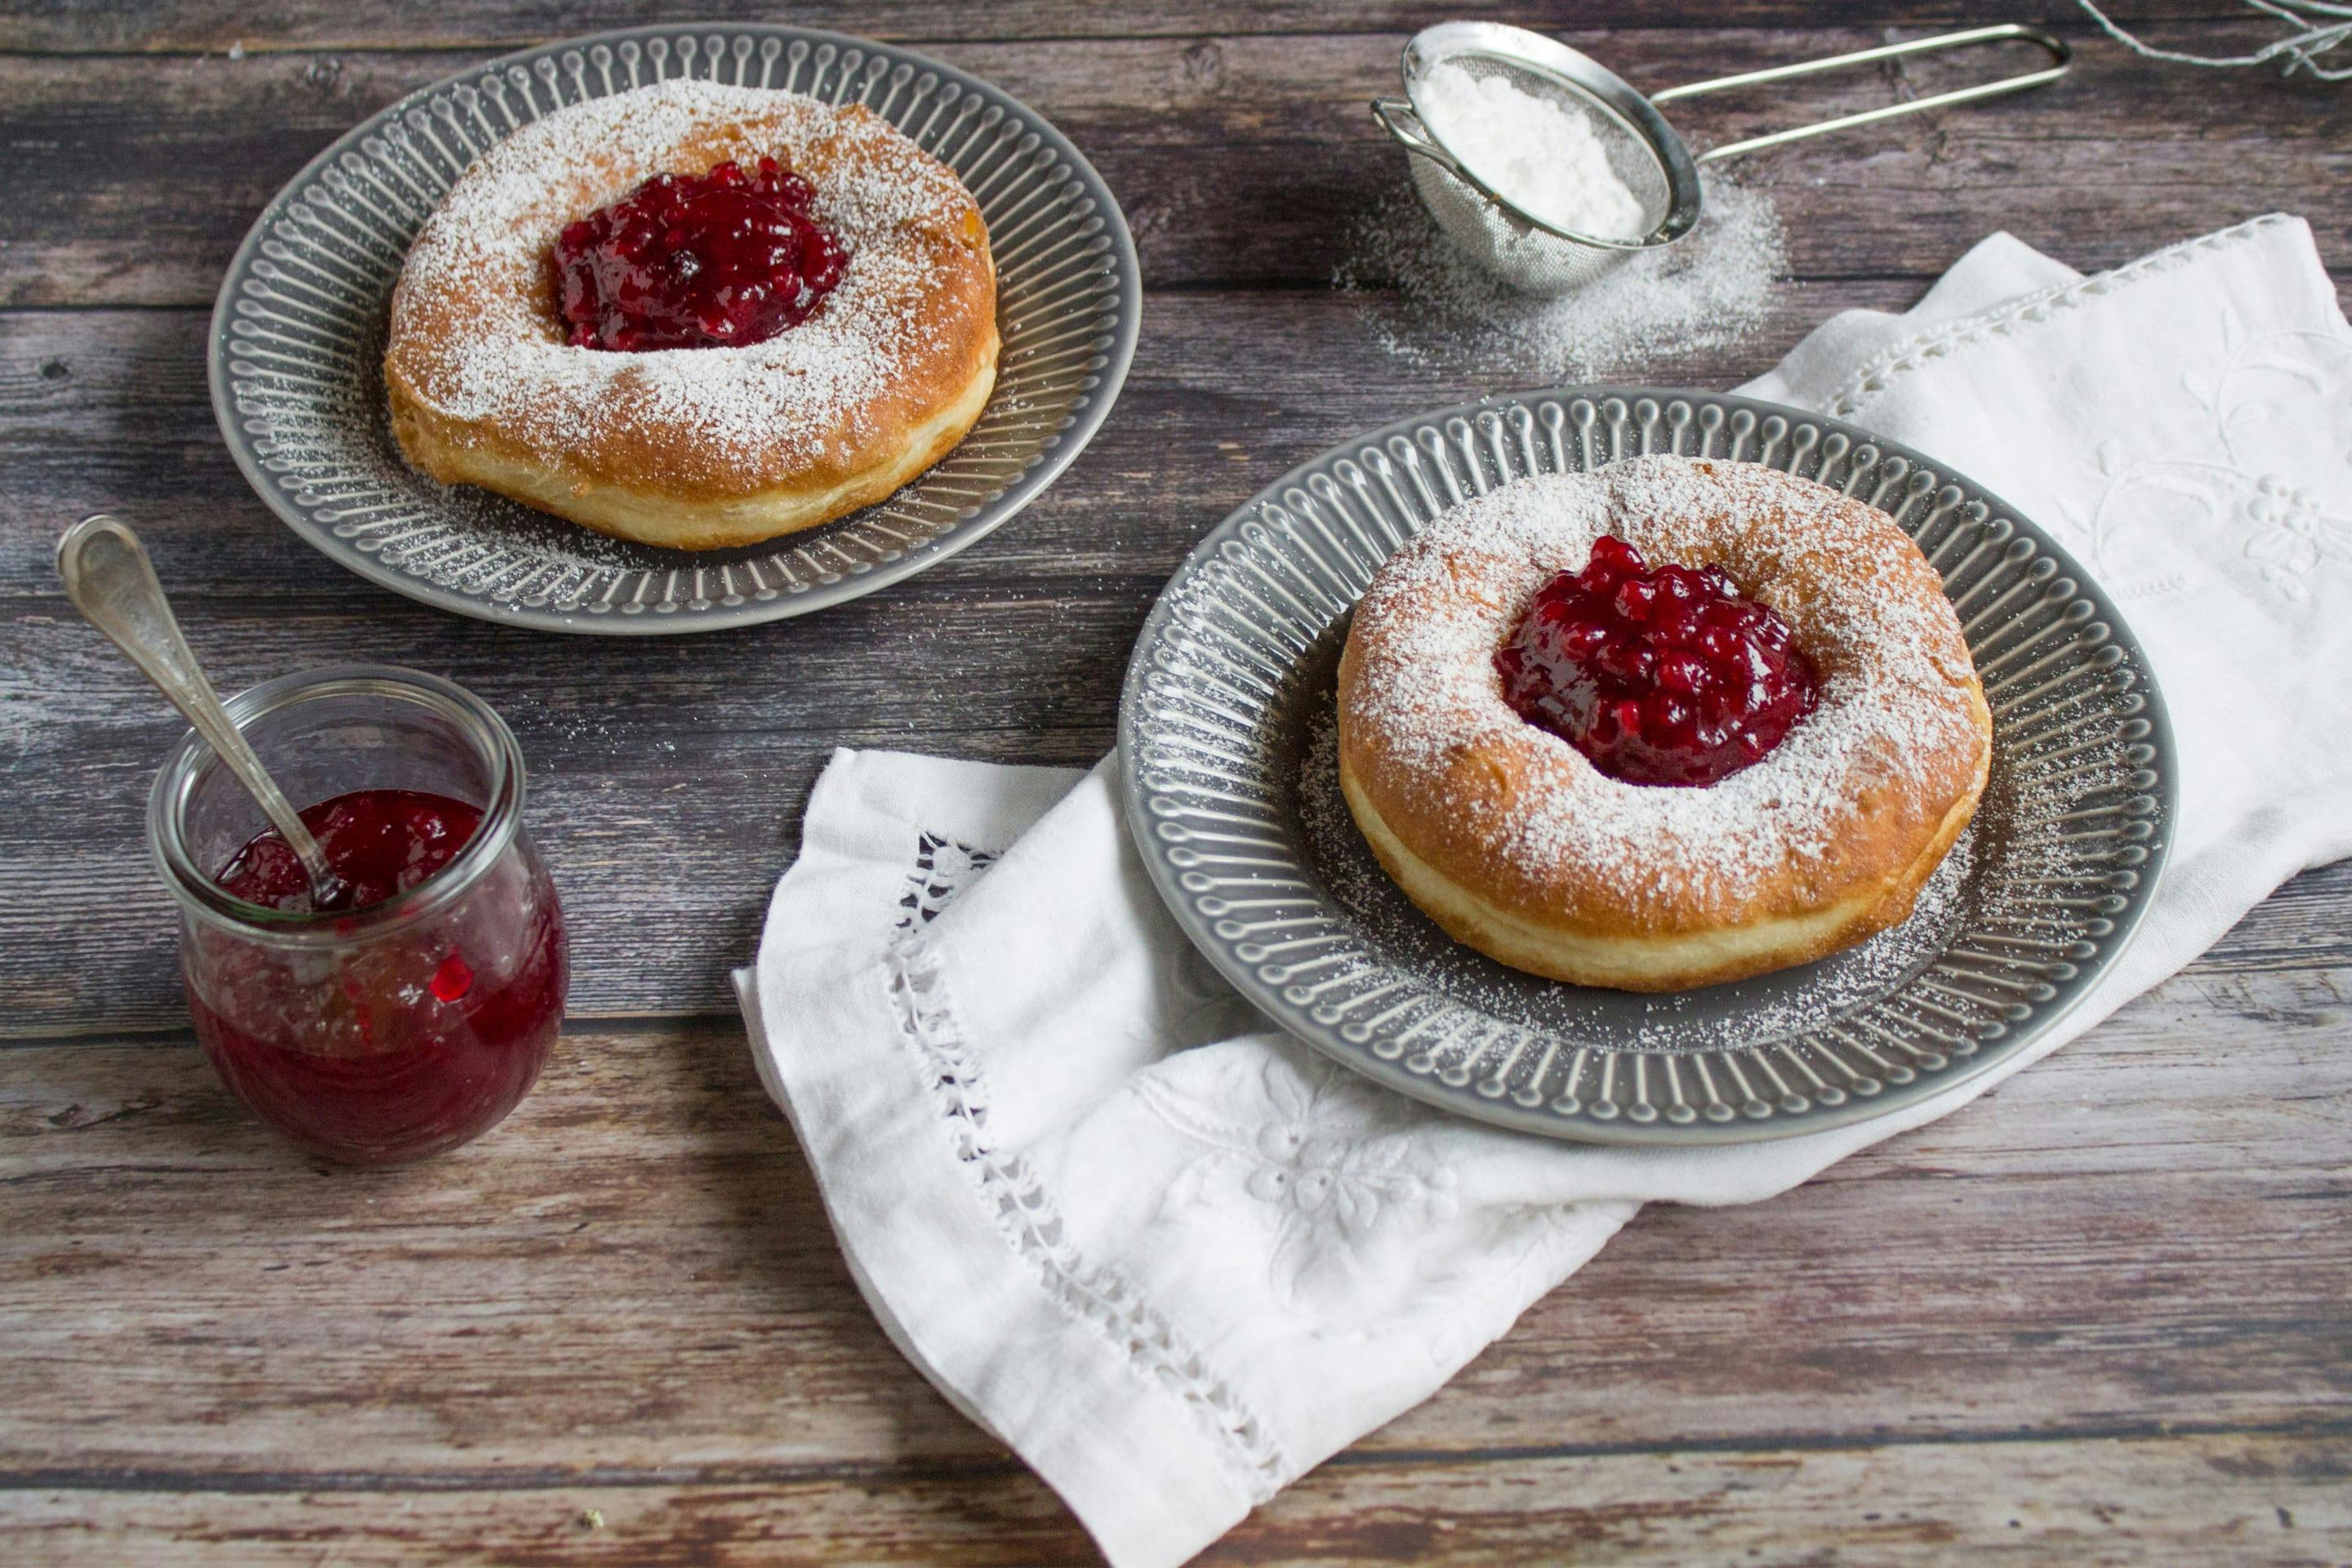 Farmer's donuts with lingonberry jam.